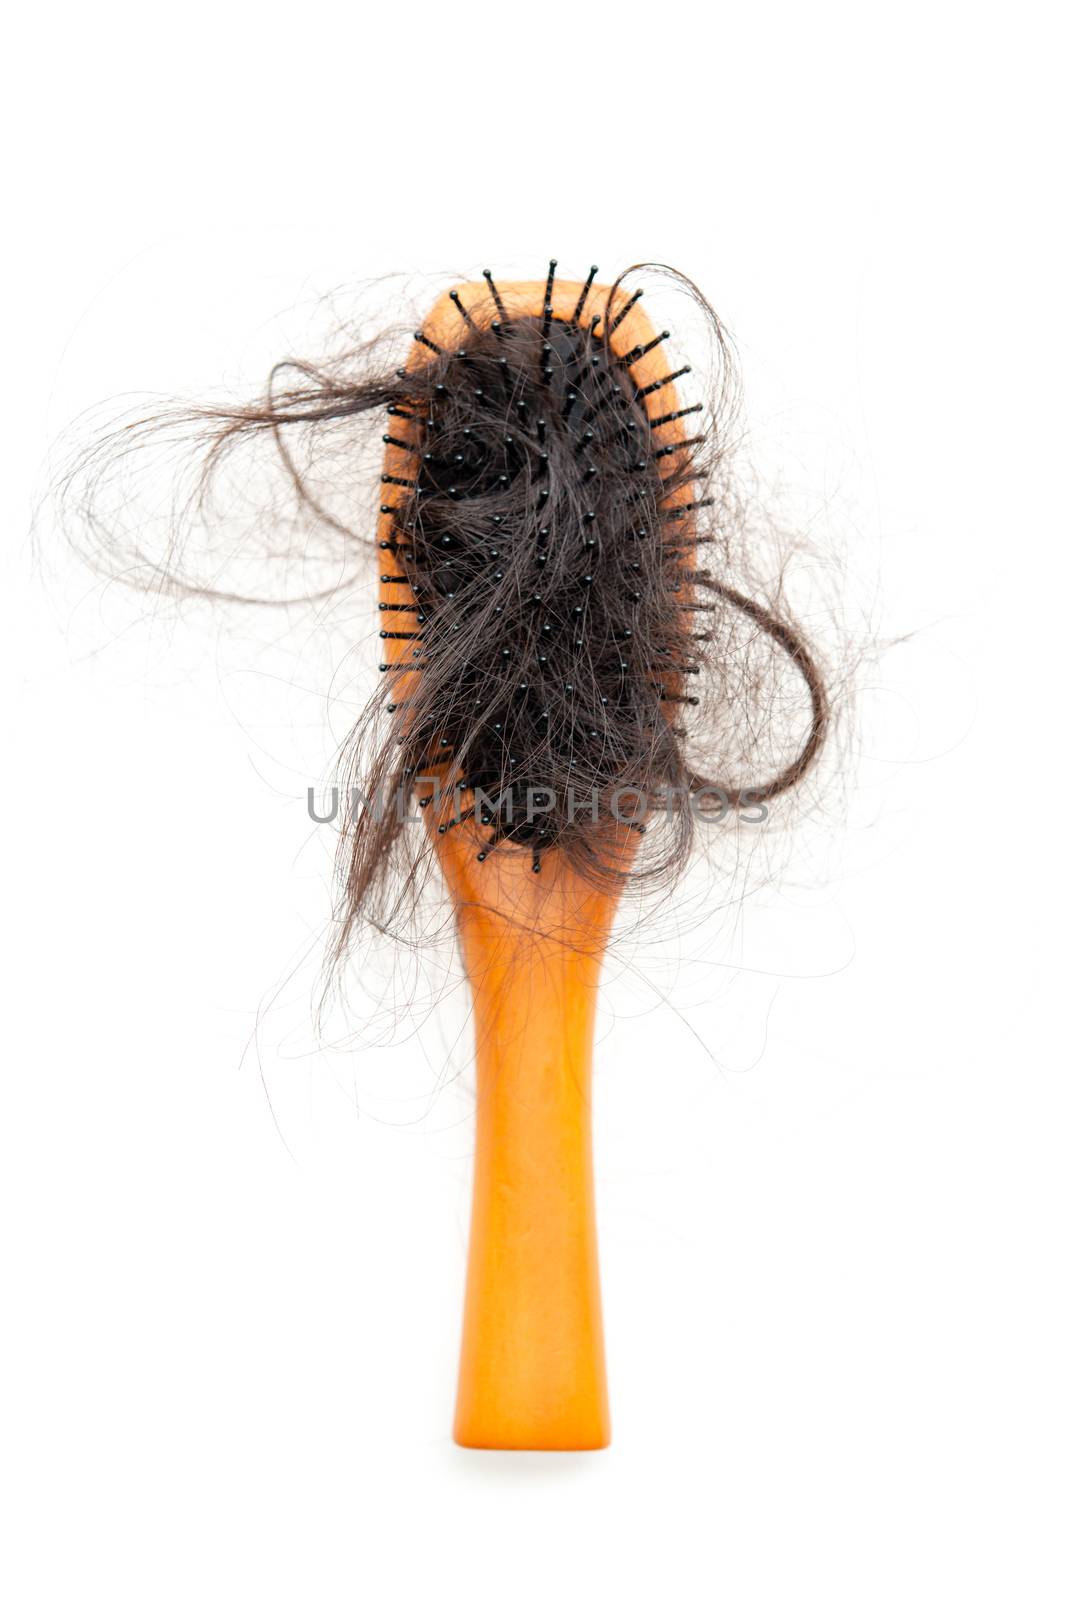 Hairloss problem. Flat lay top view brush with lost hair on it, isolated on white background.